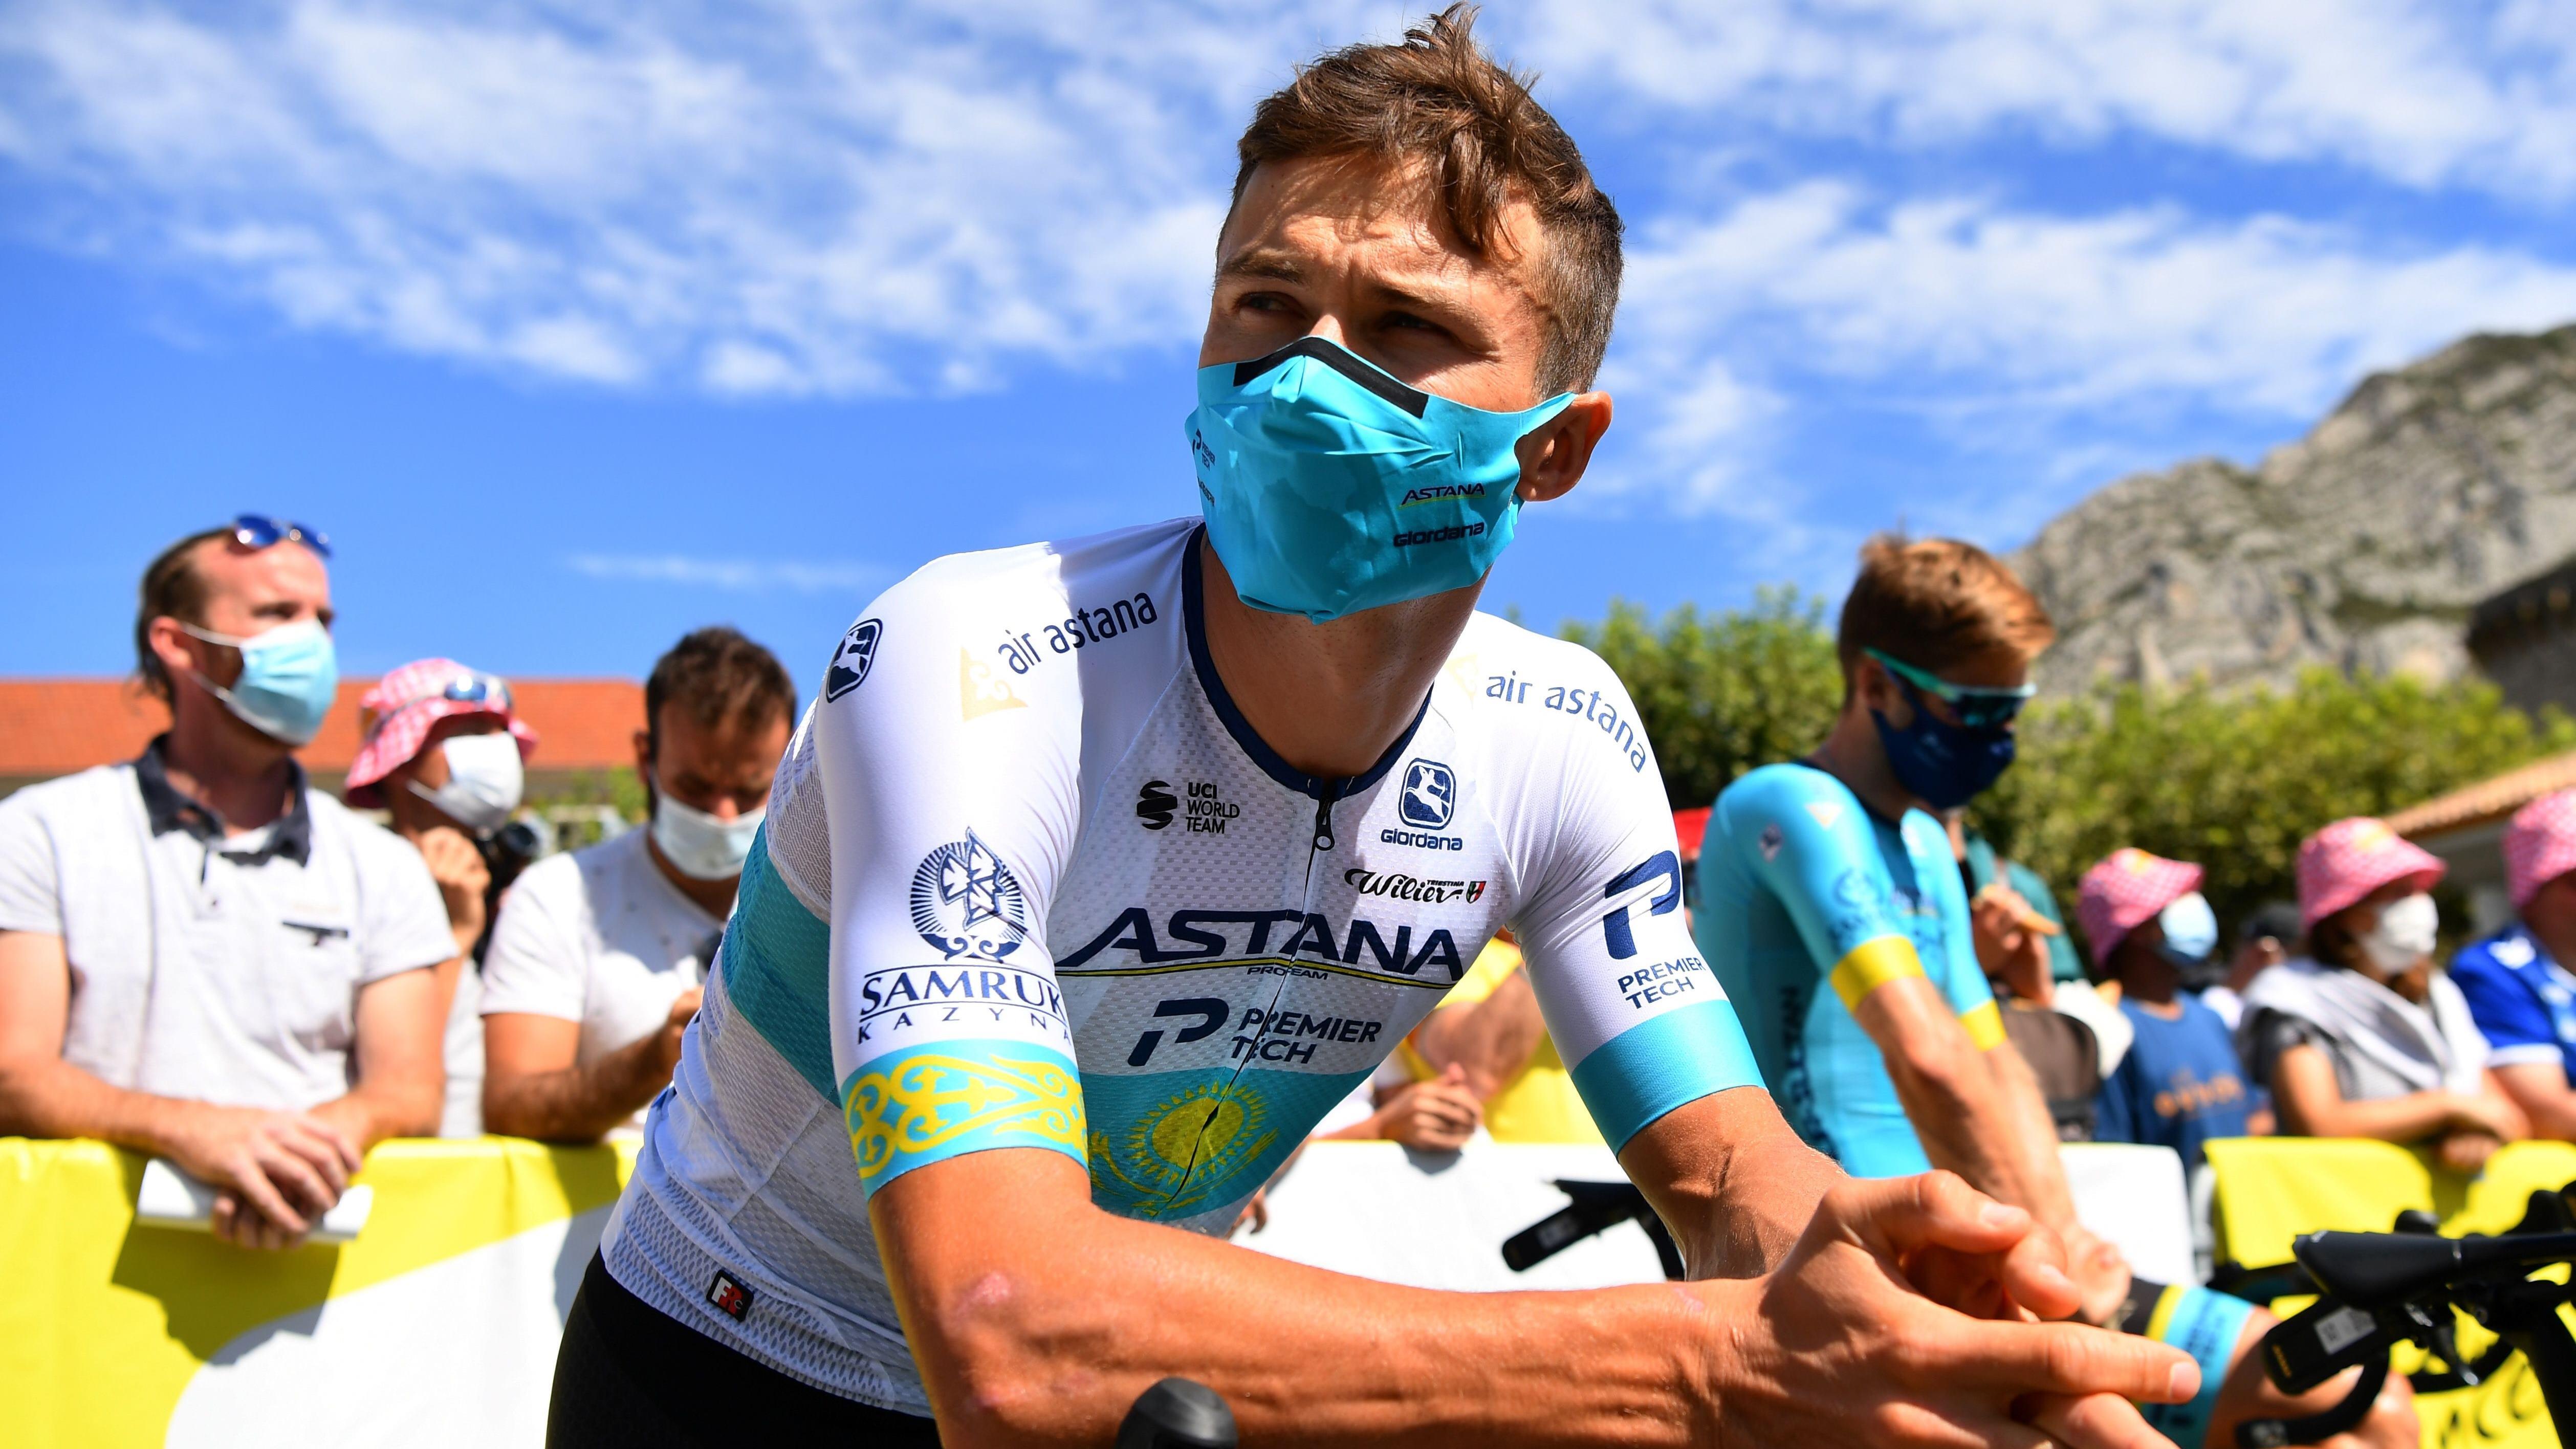 Tour de france stage 2 betting tips for today